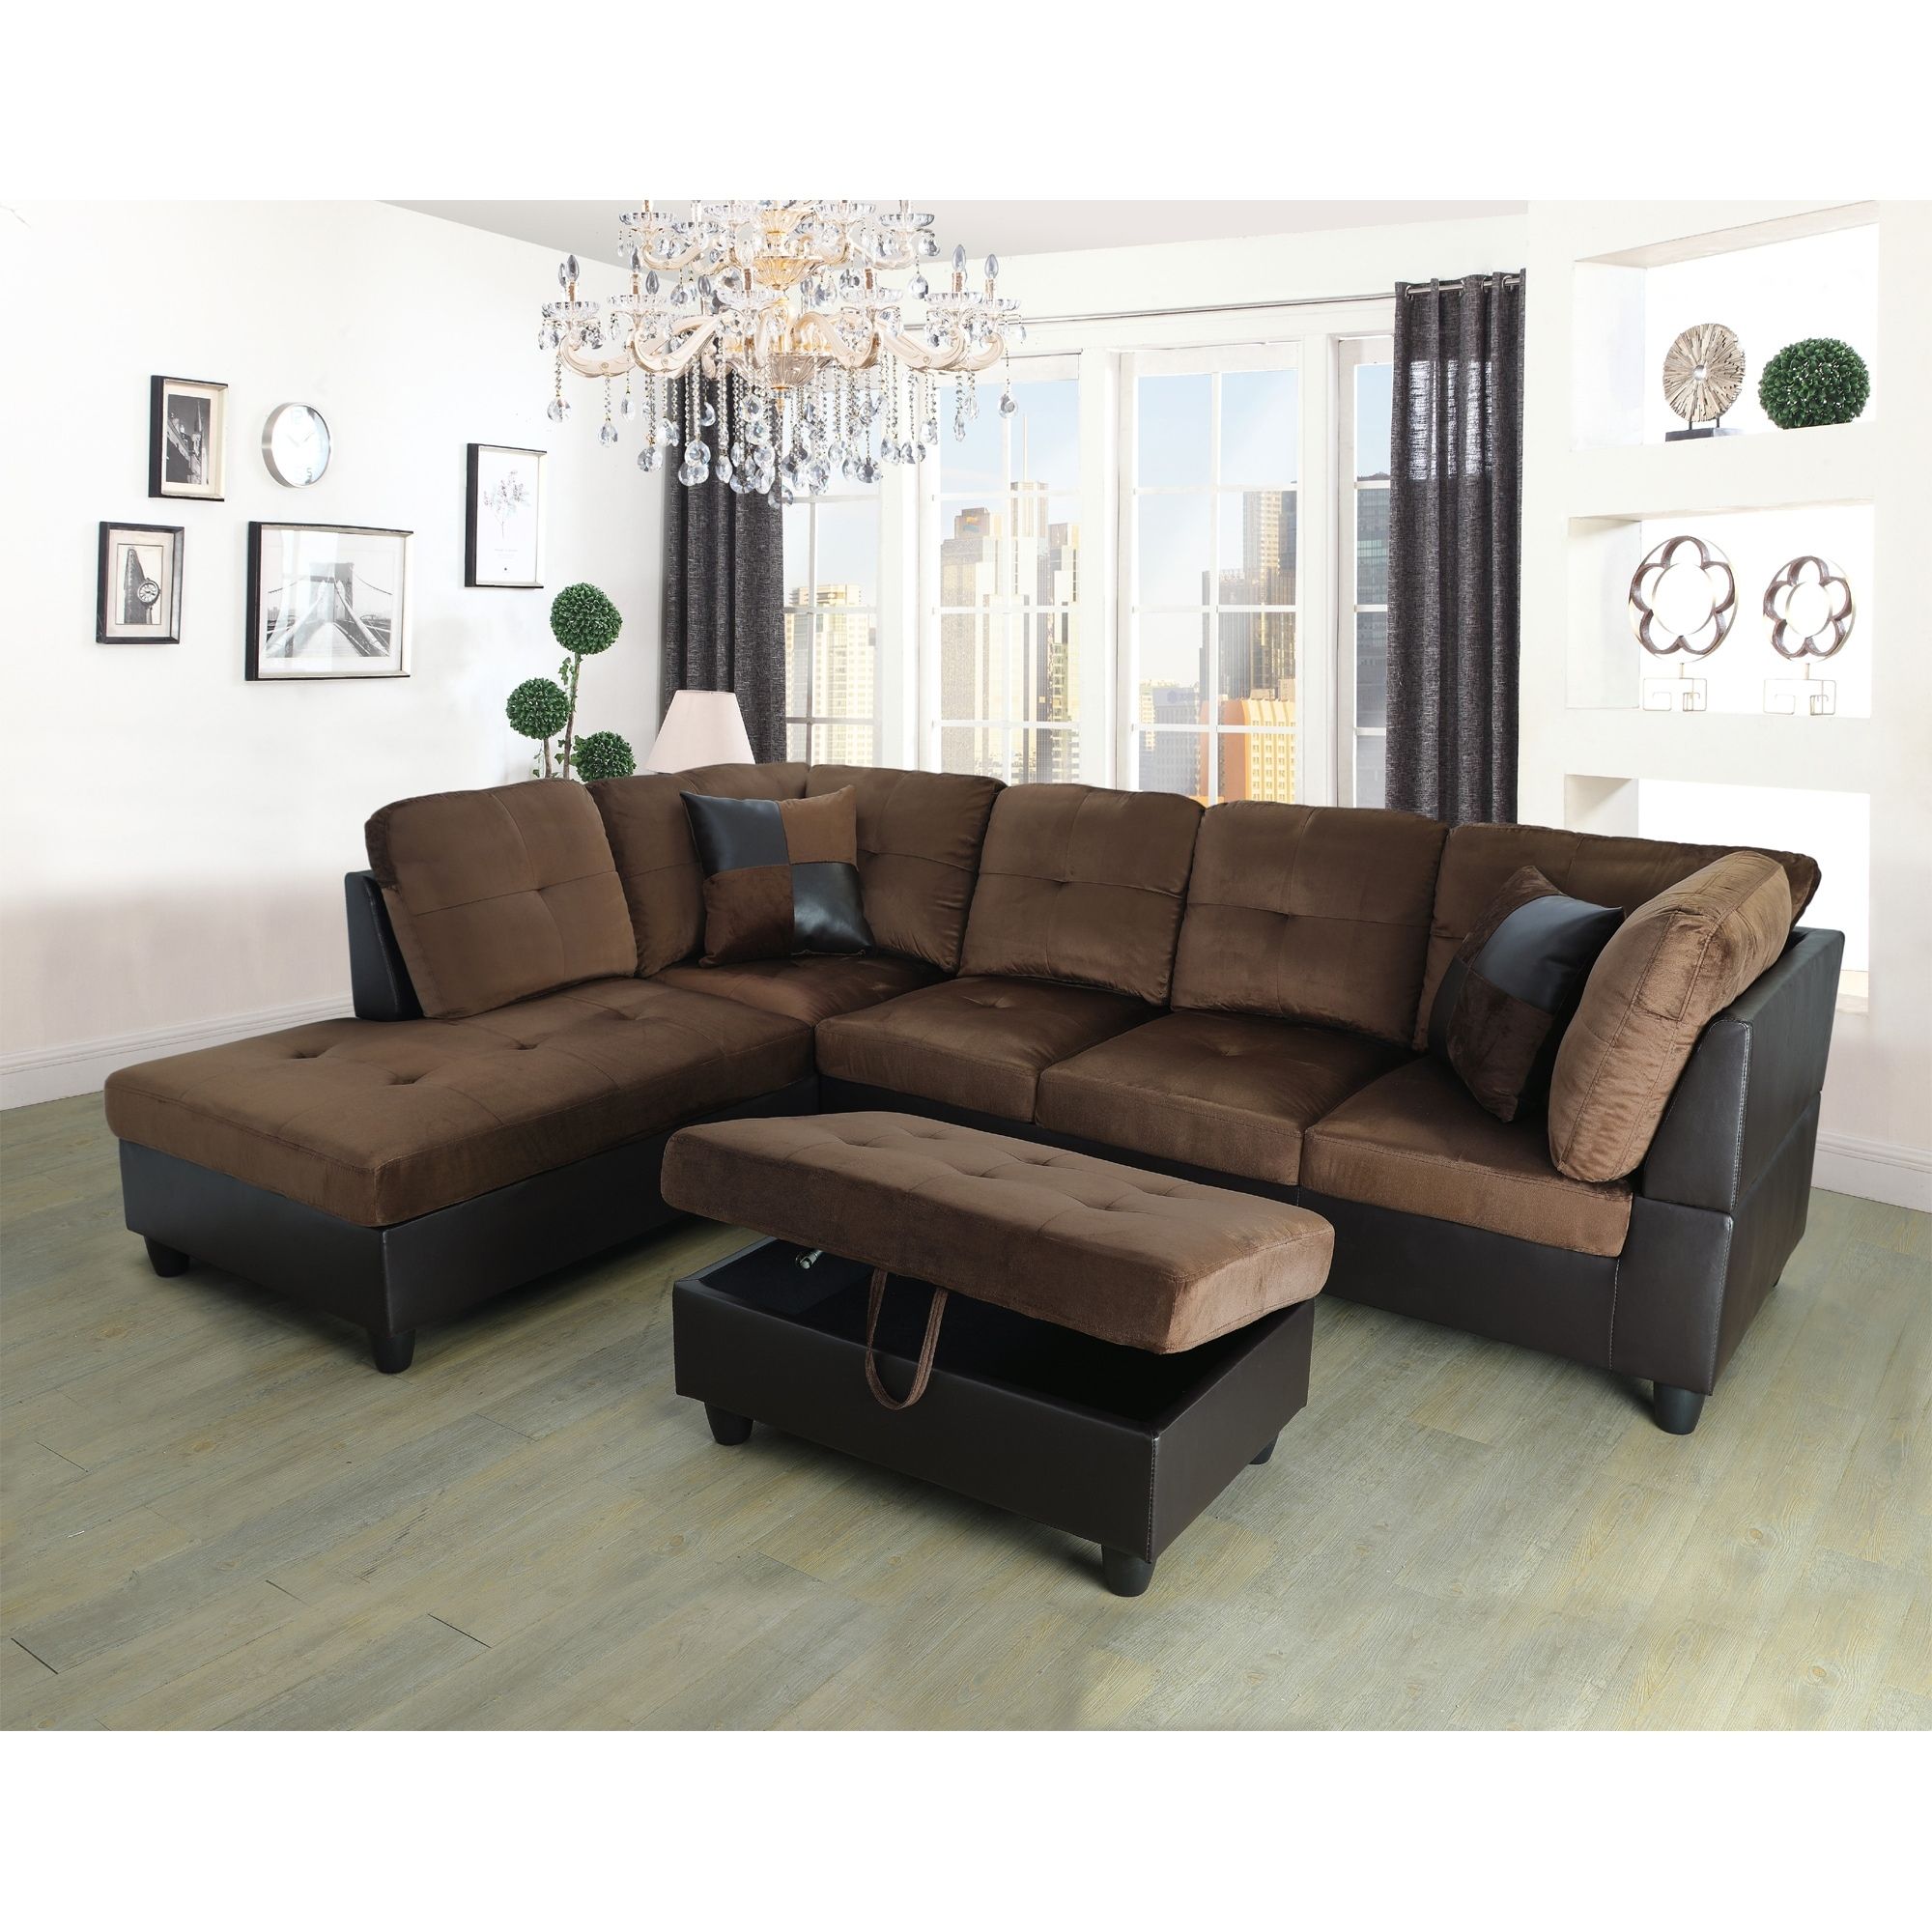 3 Pieces Sectional Sofa Set,Left Facing,Chocolate Microfiber(107A) – On  Sale – Bed Bath & Beyond – 33609340 For 2 Tone Chocolate Microfiber Sofas (View 13 of 15)